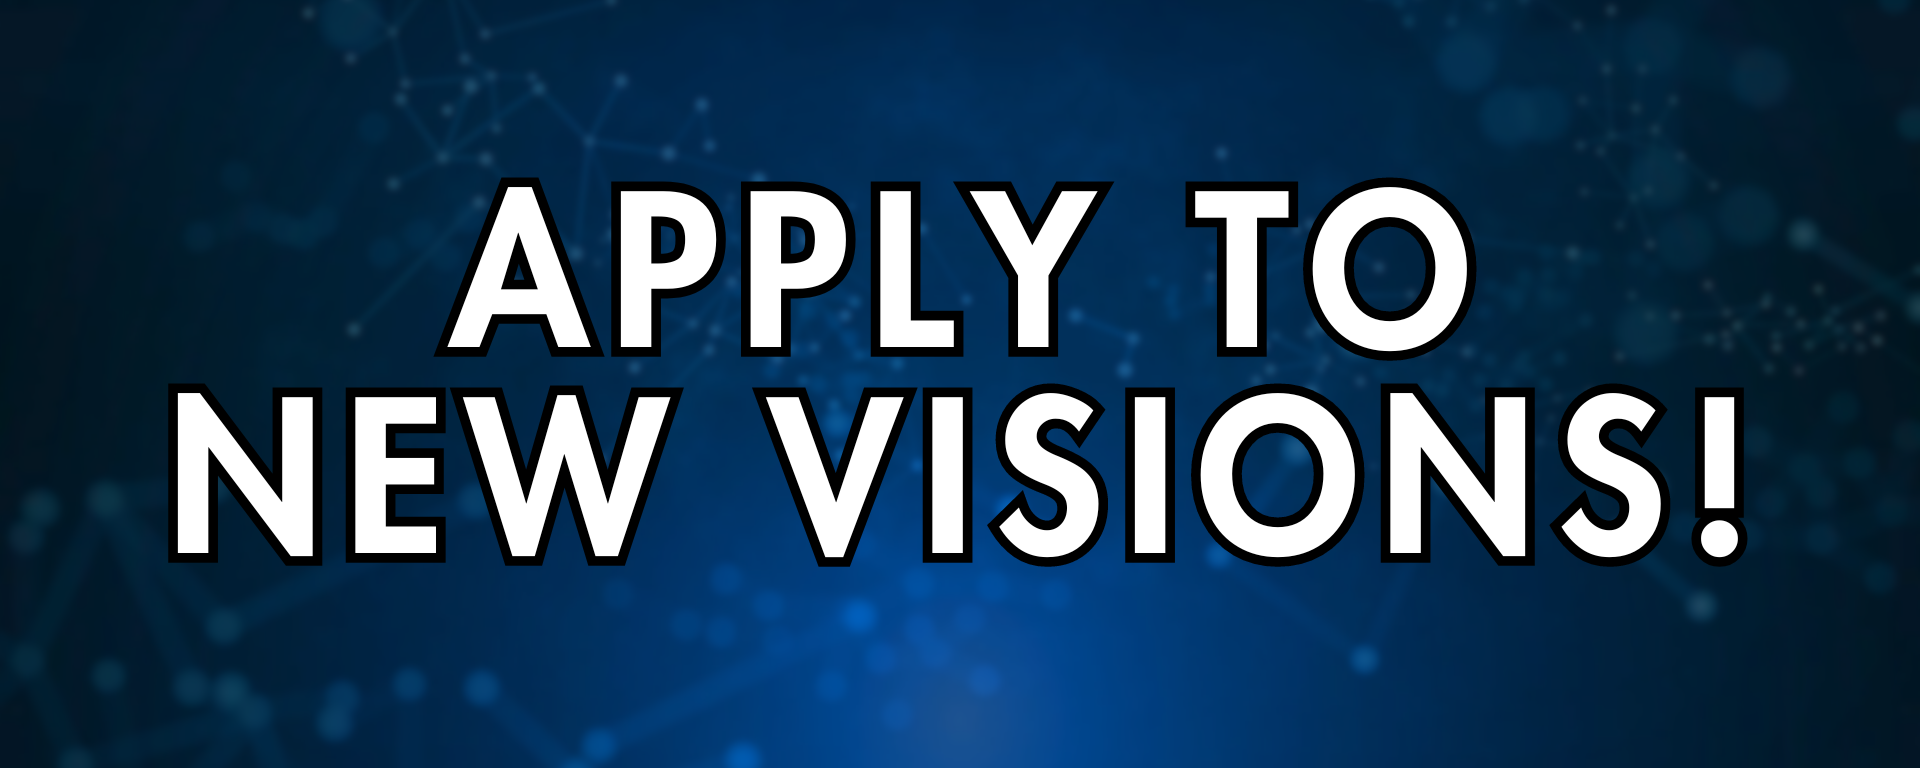 APPLY TO NEW VISIONS